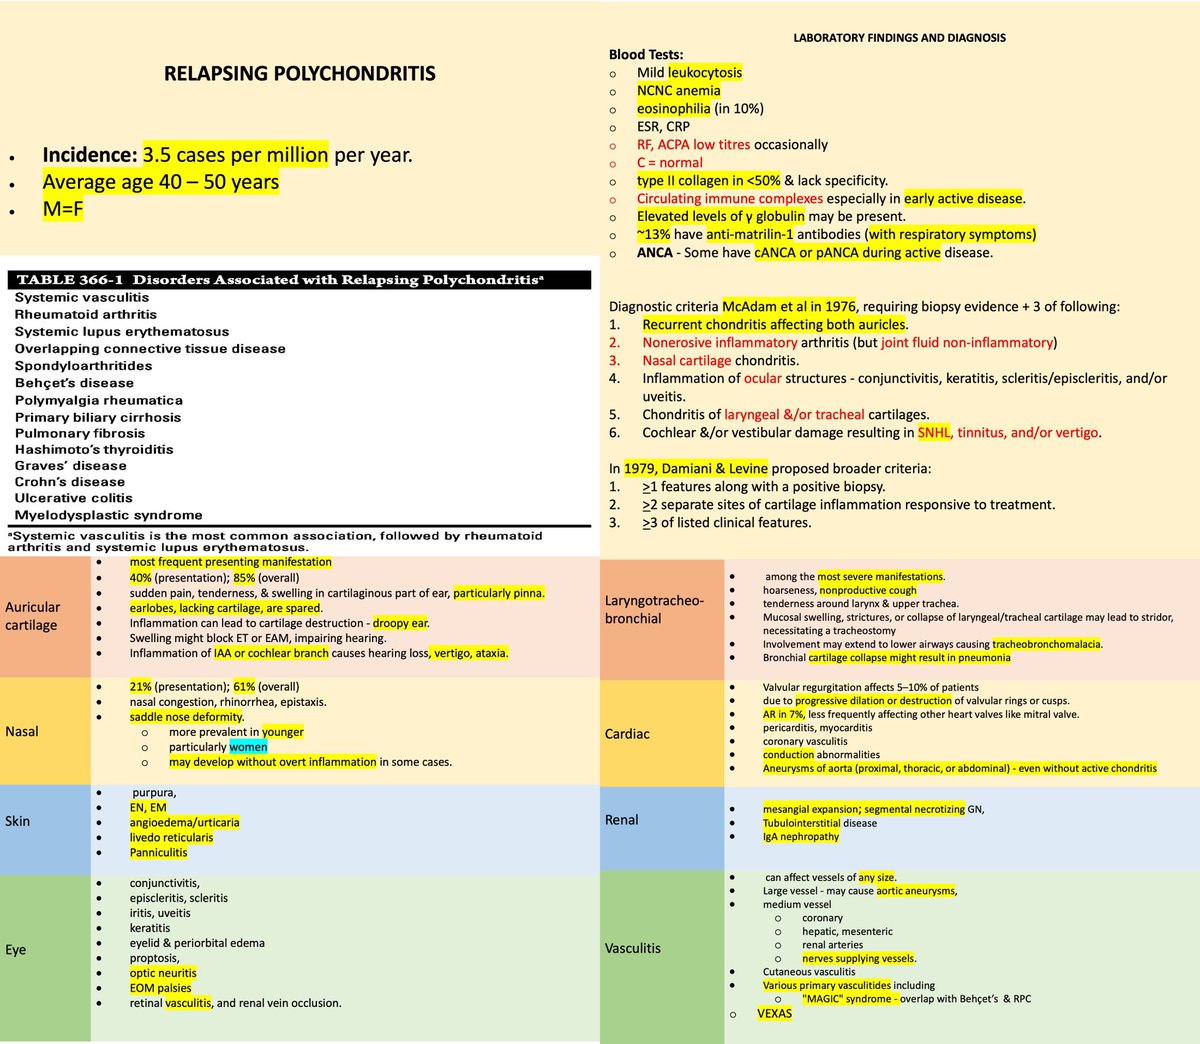 Relapsing polychondritis onepager (based on Harrison)